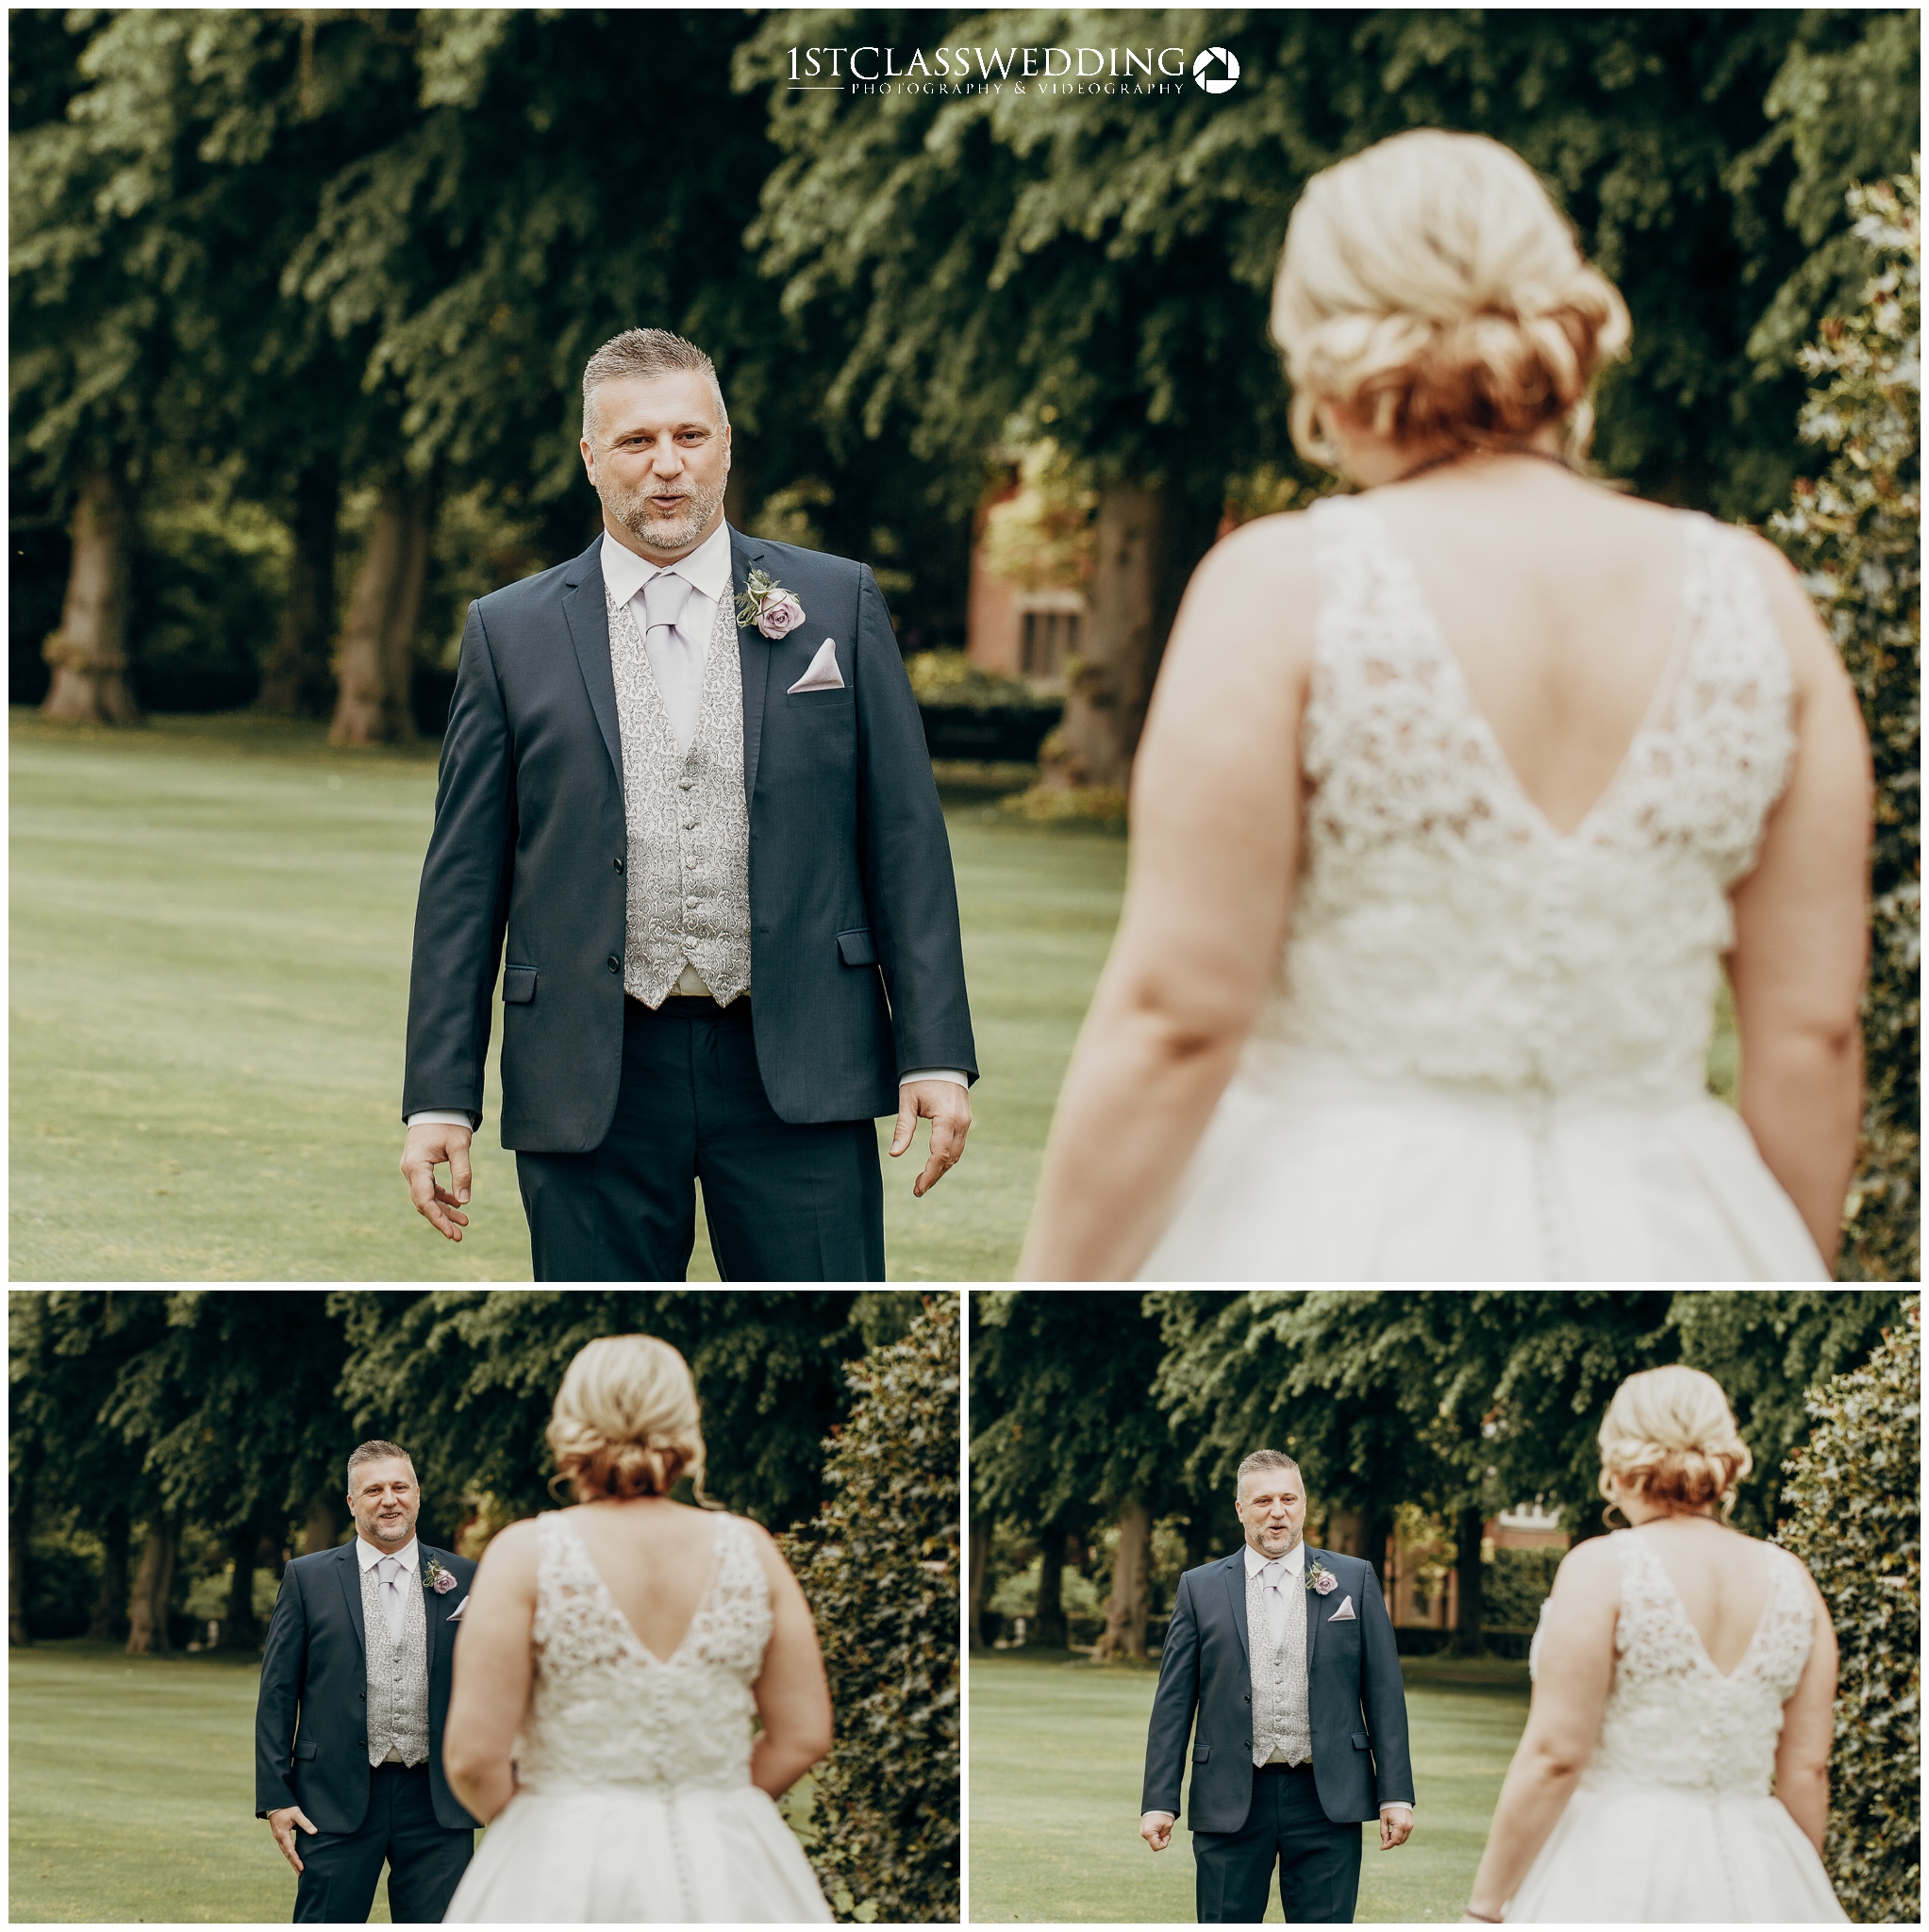 Bride and Groom enjoying a first look before their wedding. ceremony. Captured by us at Dunchurch Park